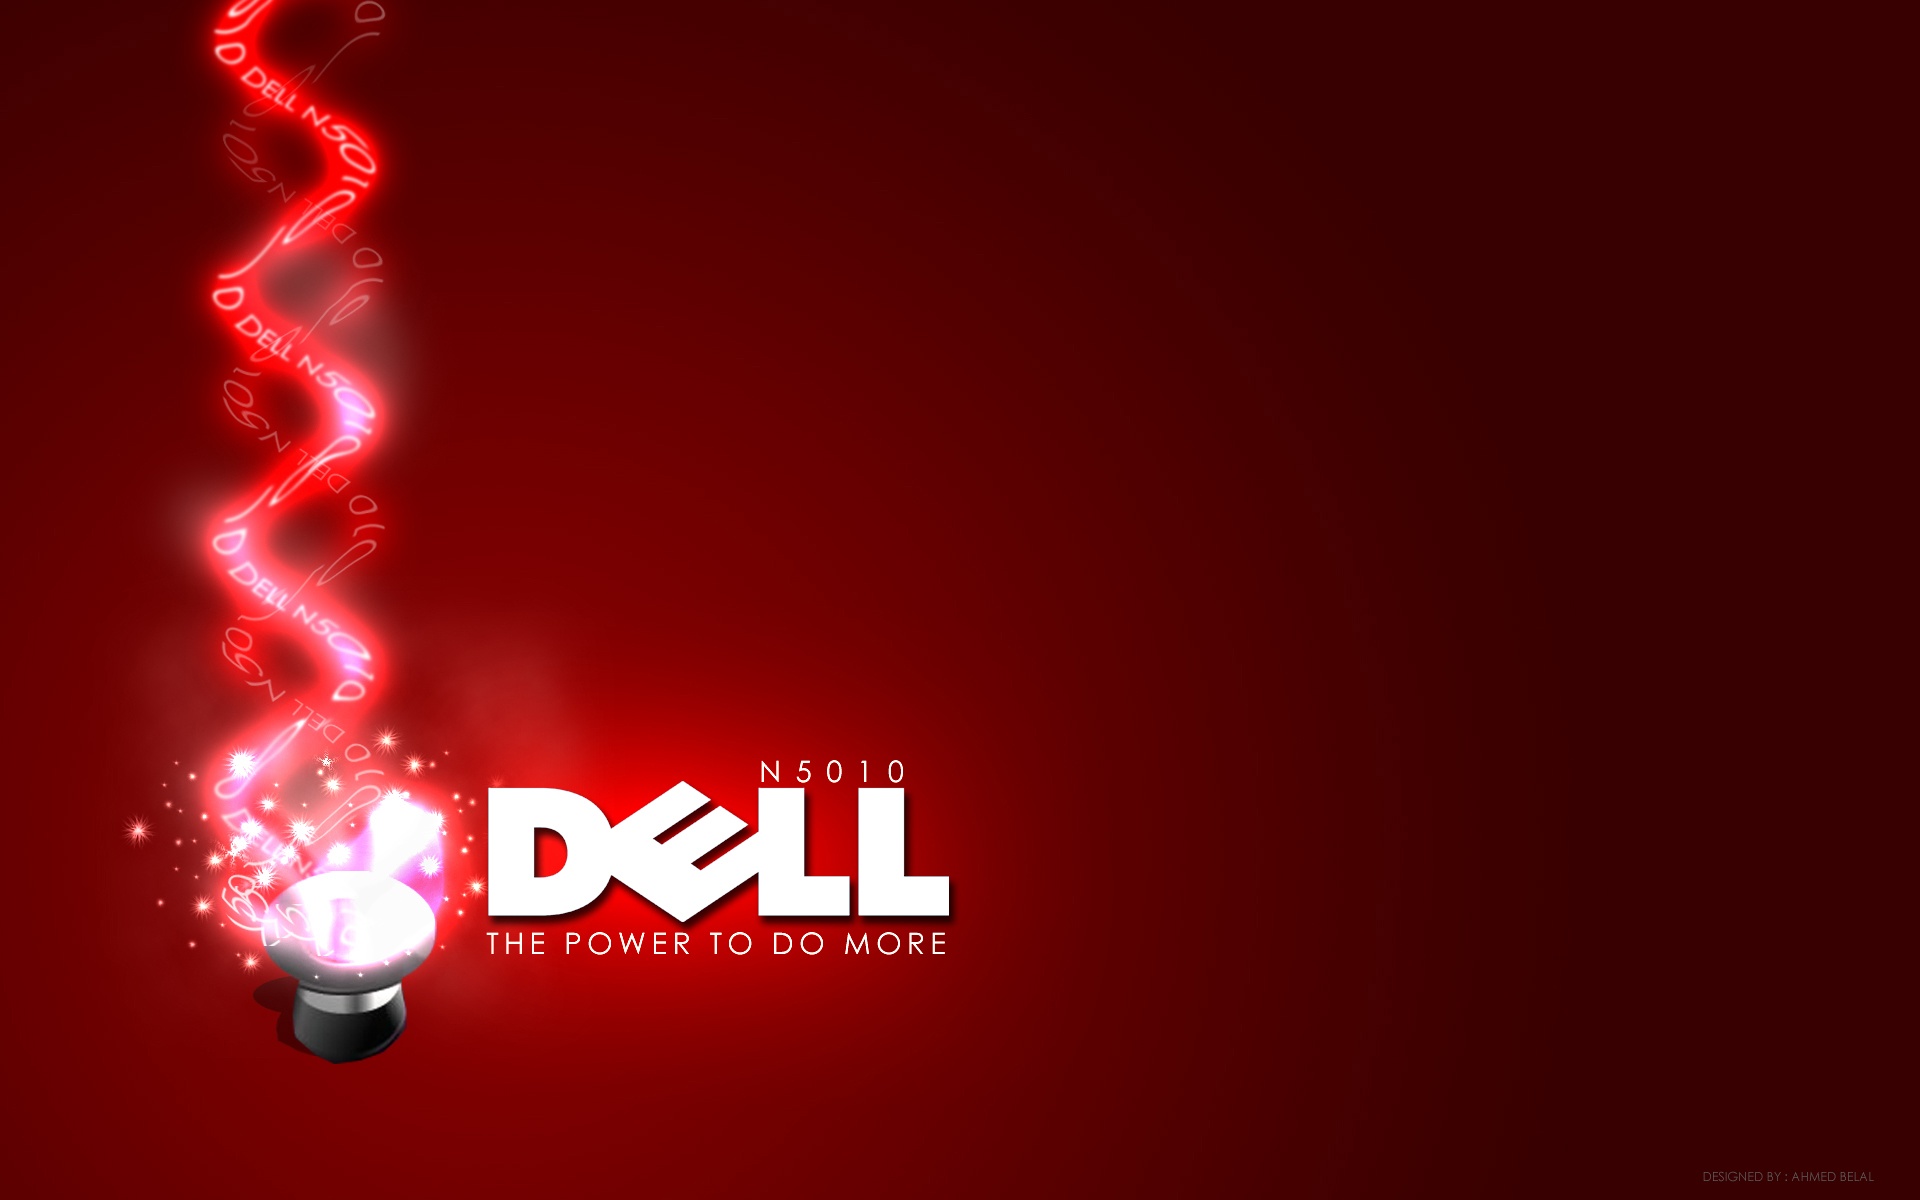 Free Download Dell Red Full Hd Desktop Wallpapers 1080p 19x10 For Your Desktop Mobile Tablet Explore 48 Dell Xps Wallpaper 19x1080 Dell Xps Wallpaper 1280x800 Dell Studio Xps Wallpaper